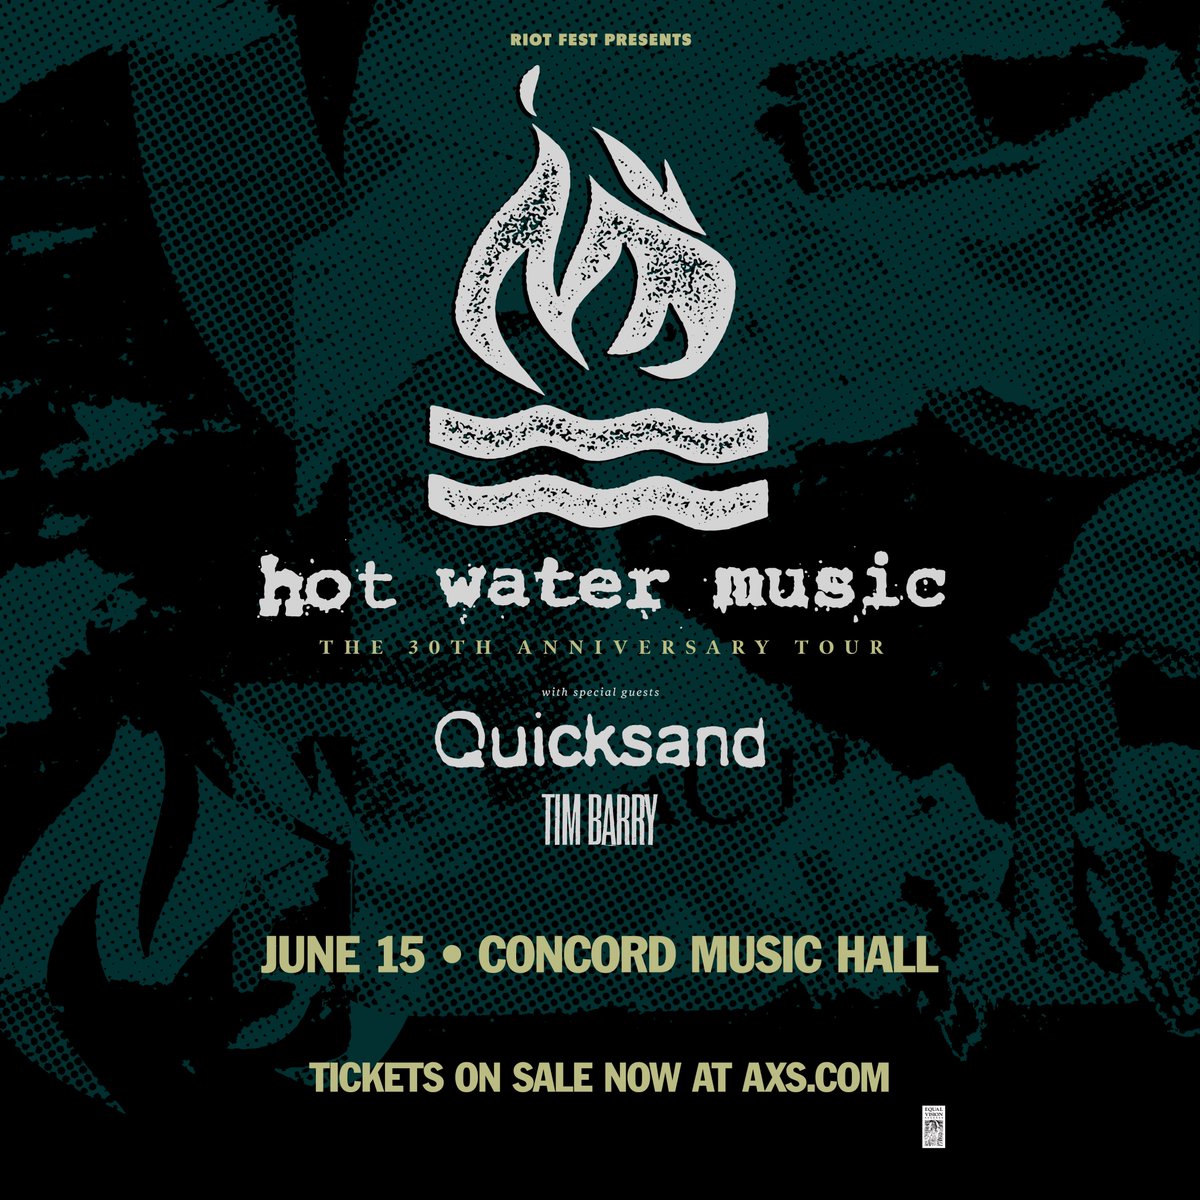 ICYMI: @HotWaterMusic just released their latest album 'Vows' ft. members of Turnstile, Thrice, Alexisonfire, and more. Catch them on their 30th Anniversary Tour with @QuicksandNYC and @TIMBARRYRVA on June 15 at @ConcordHall.⁠ Tickets on sale now: bit.ly/CMH-HotWaterMu…